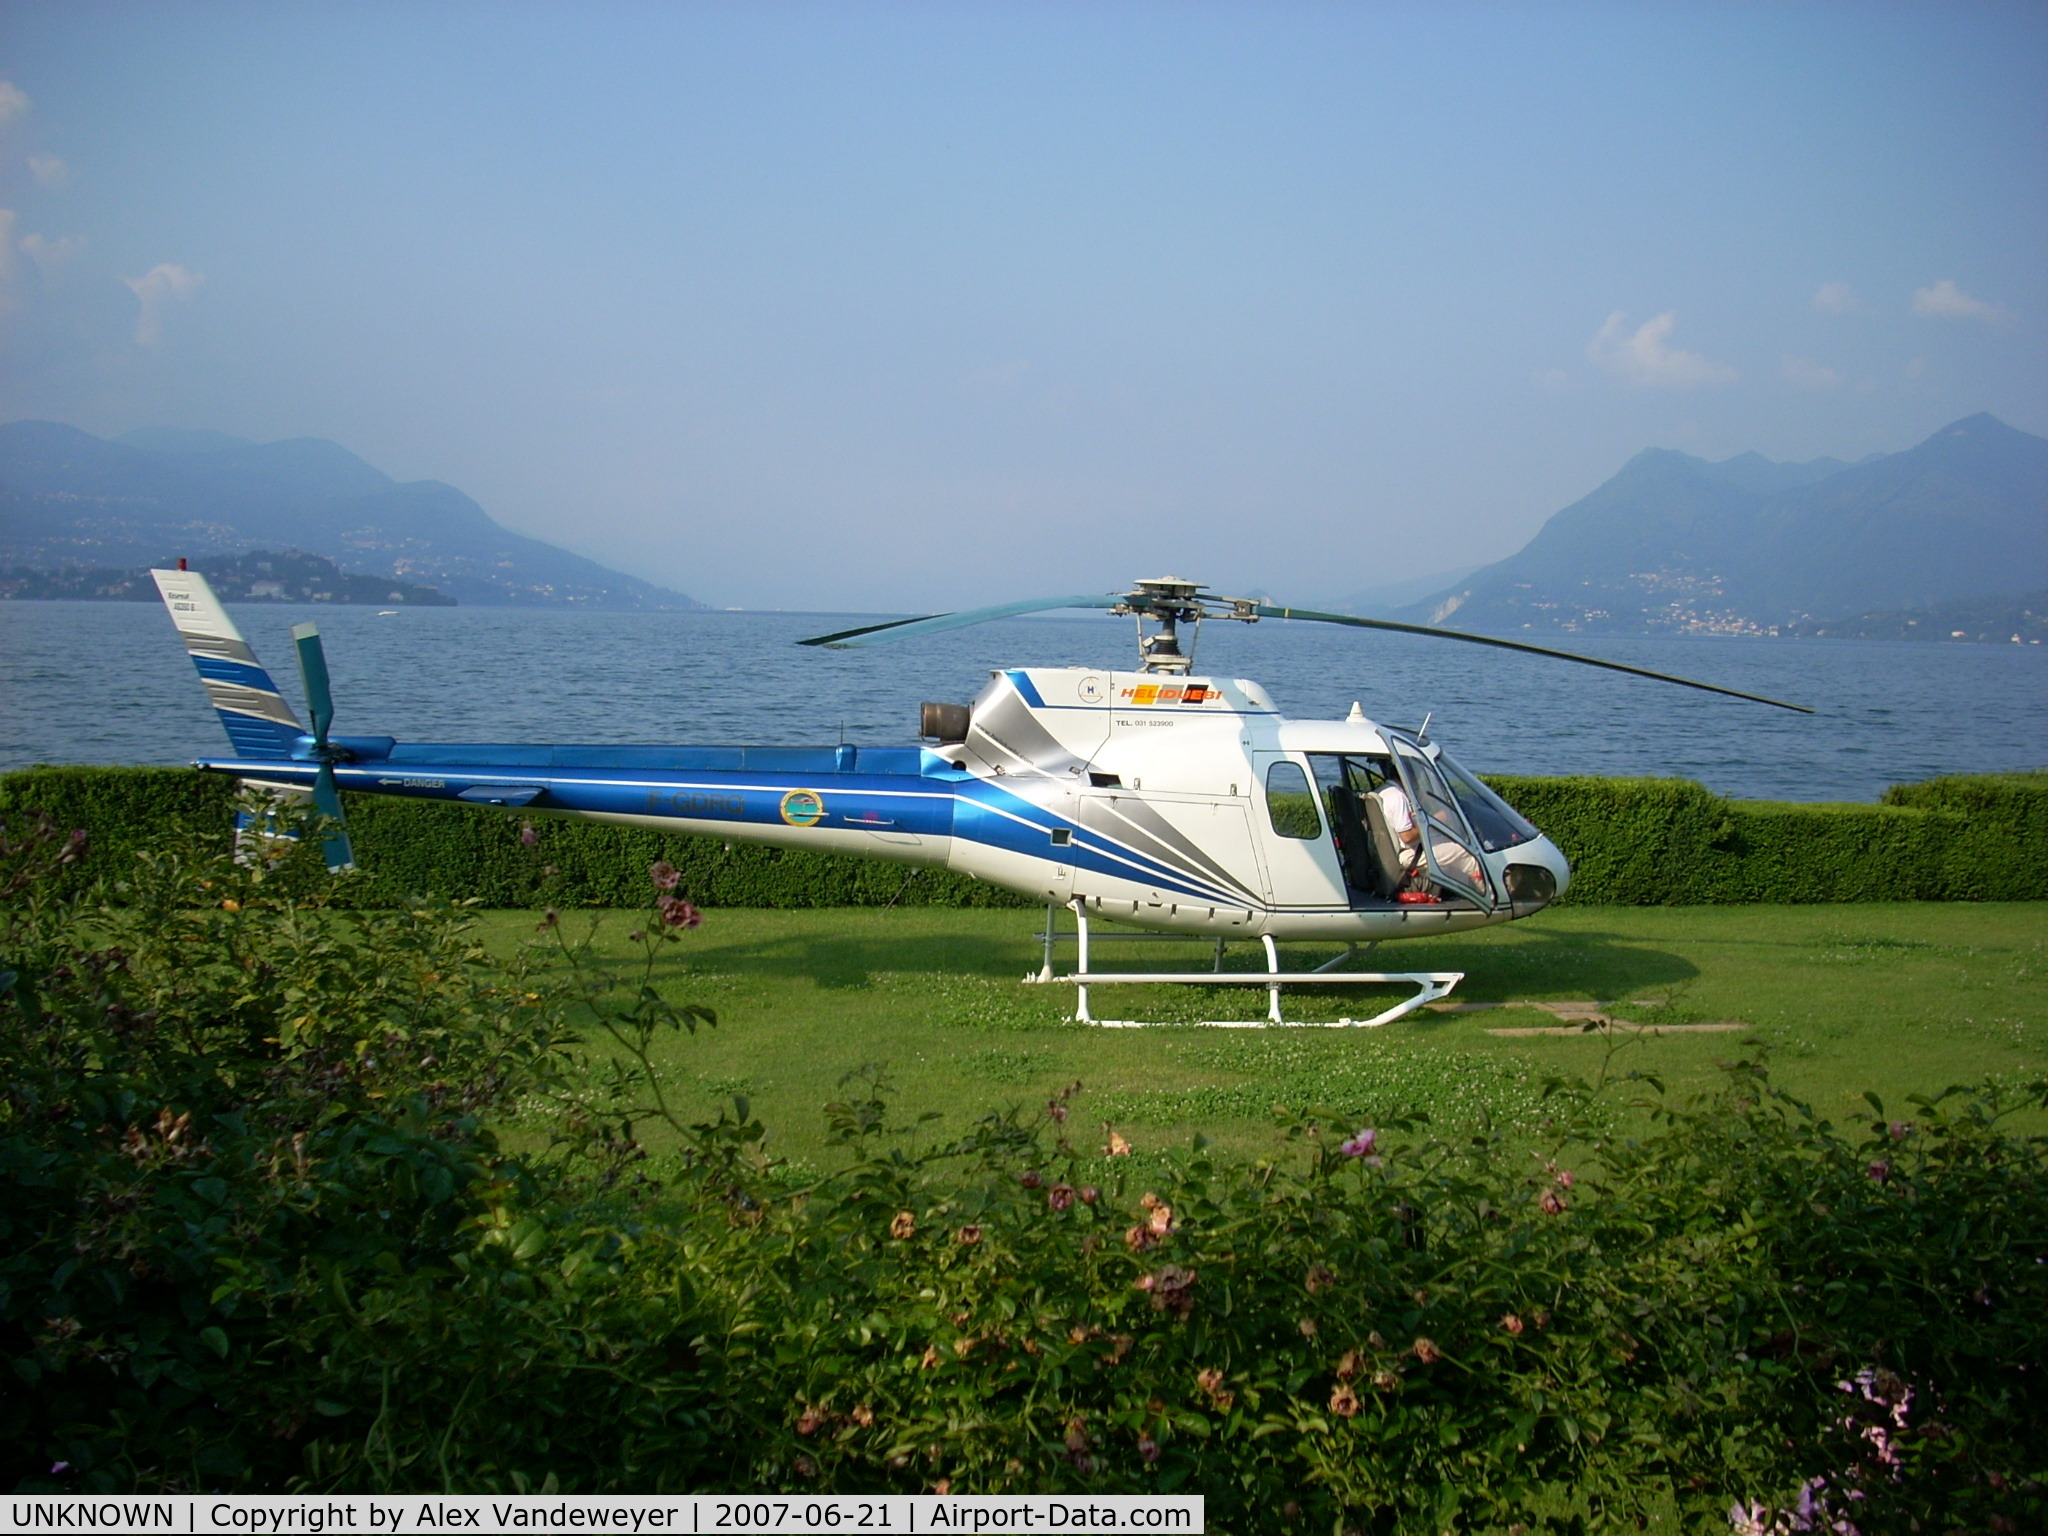 UNKNOWN, Helicopters Various C/N unknown, Short stop in Baveno, Lago Maggiore in front of hotel